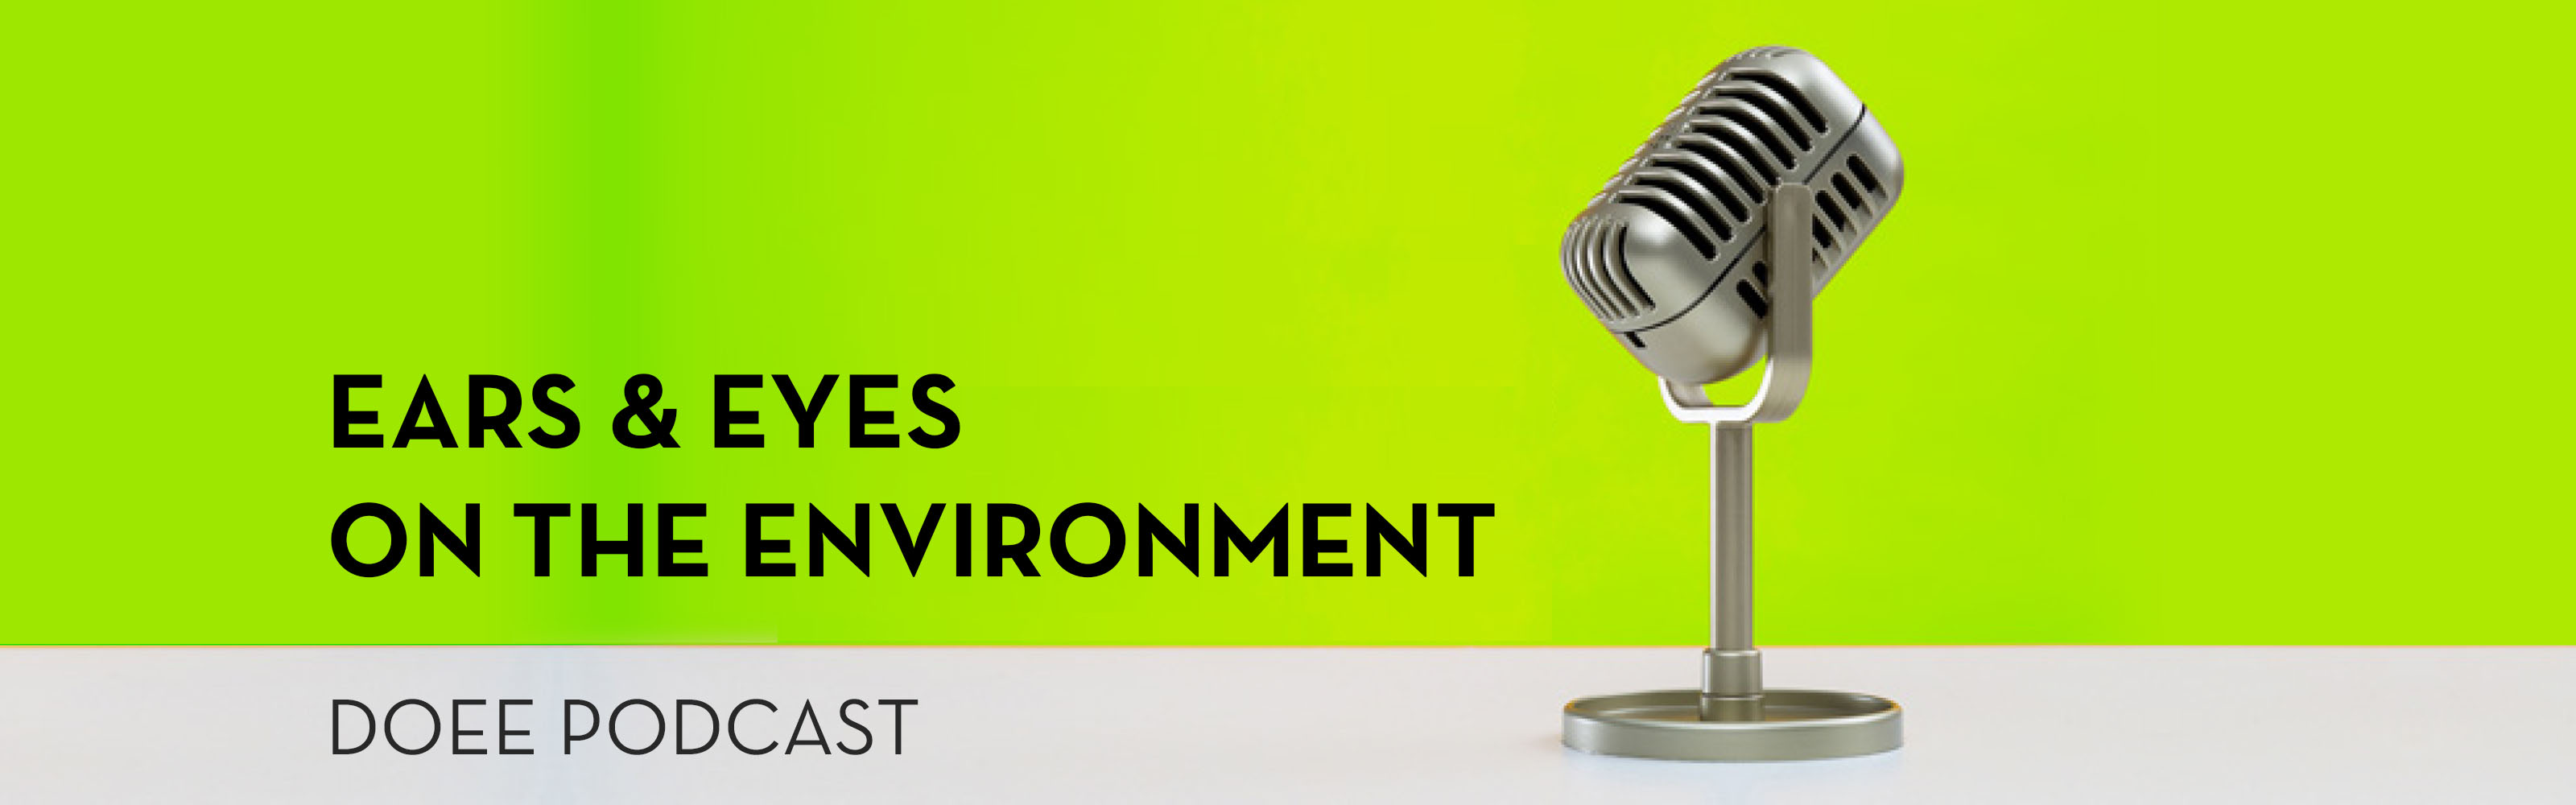 Ears & Eyes on the Environment - DOEE Podcast